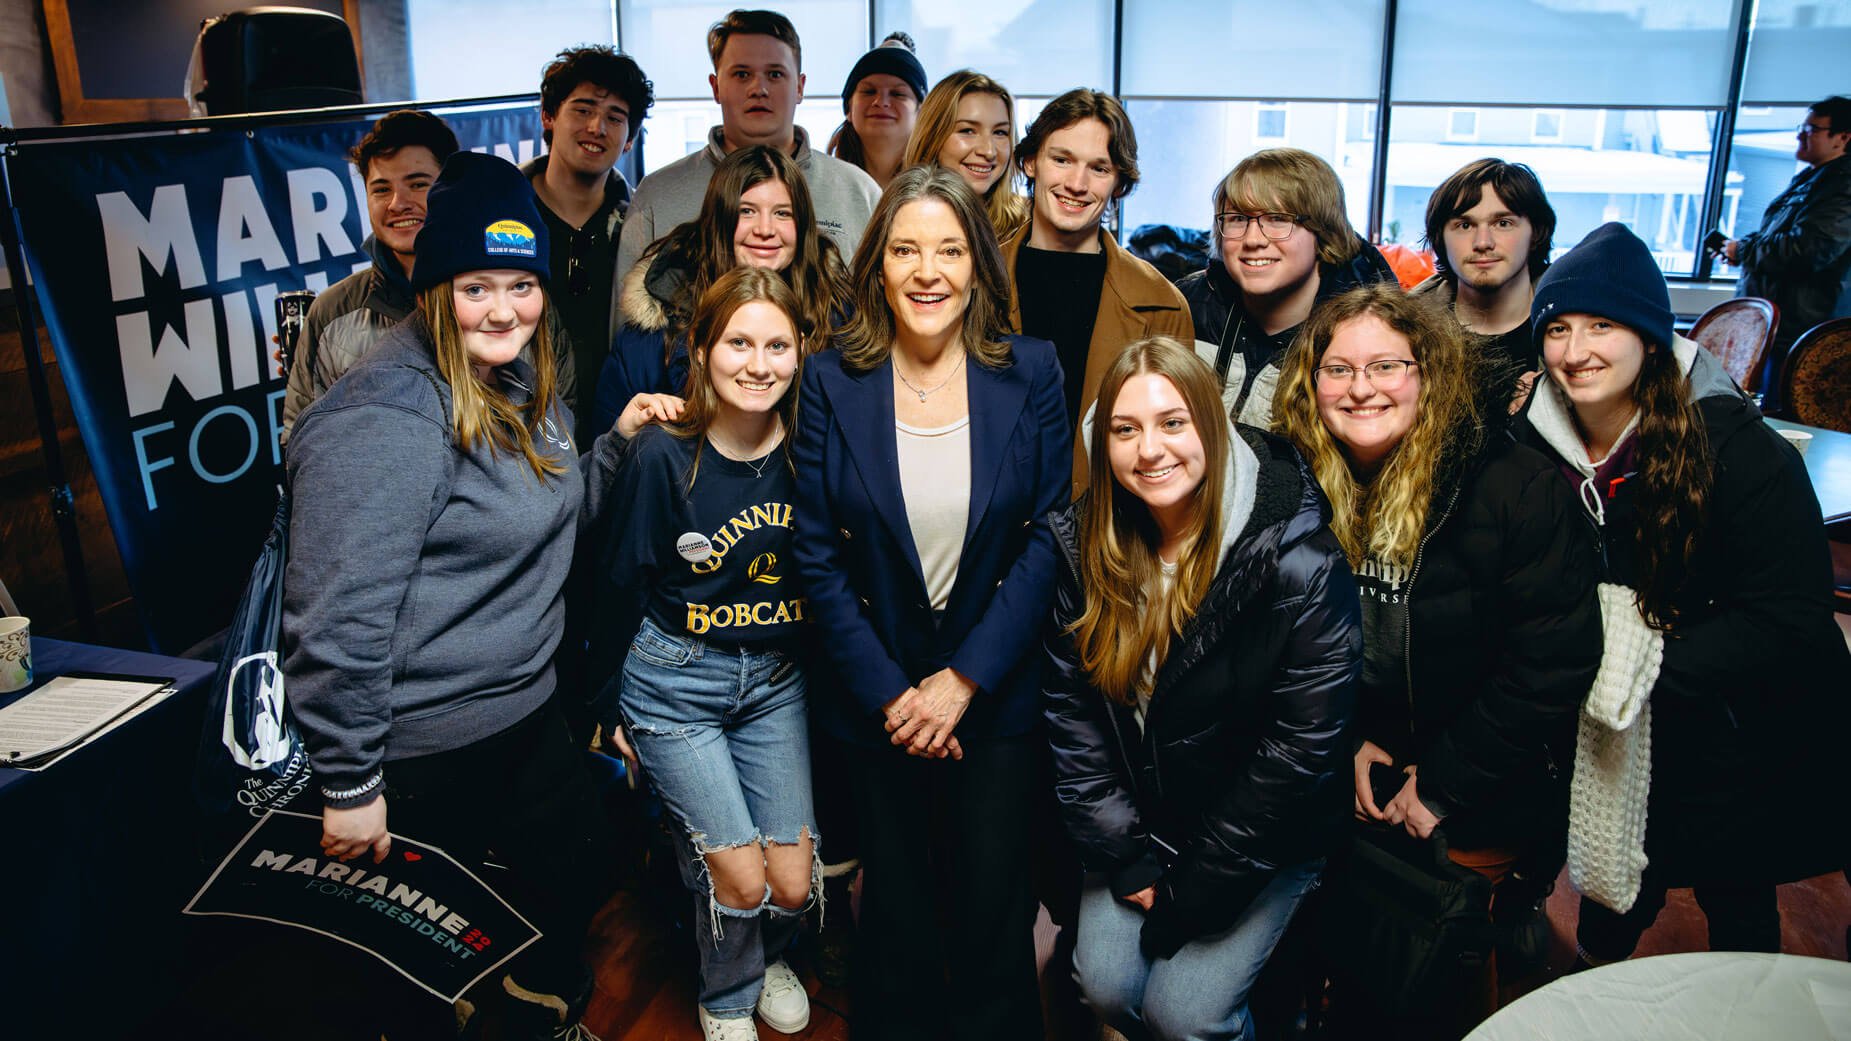 Quinnipiac students take a photo with presidential candidate Marianne Williamson.